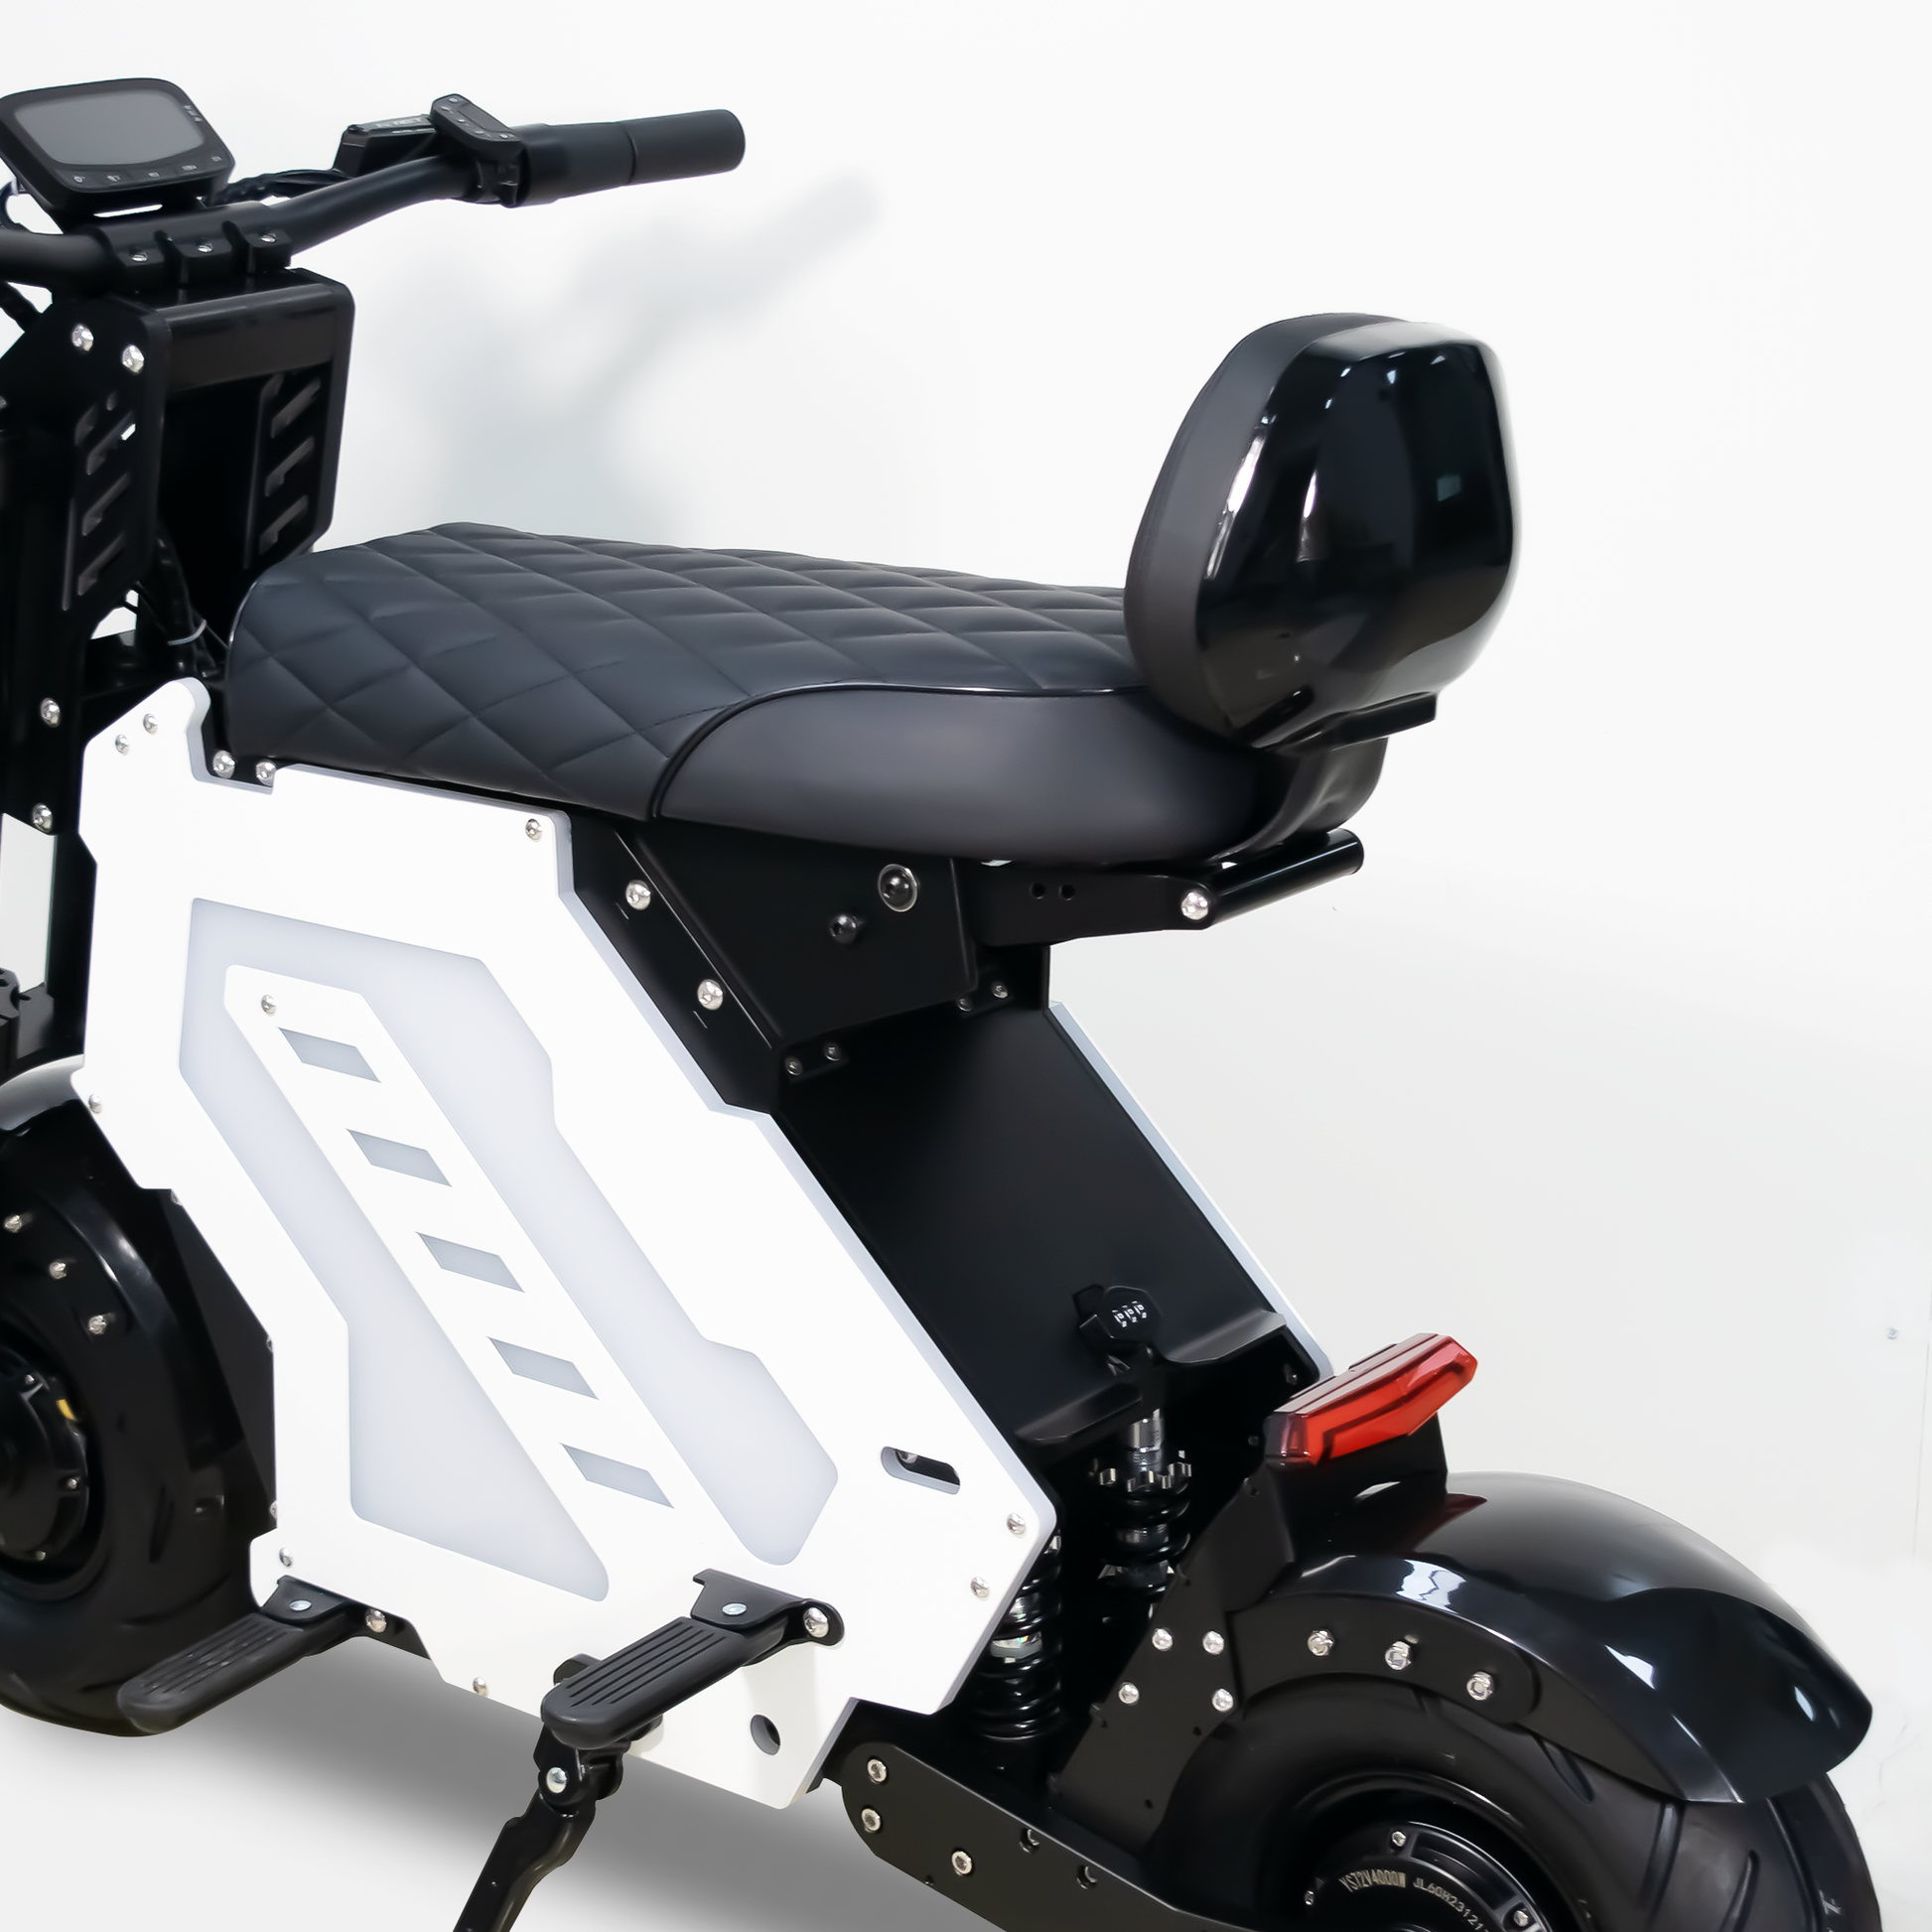 Electric Mini Motorcycle Equipped with a Comfortable Backrest